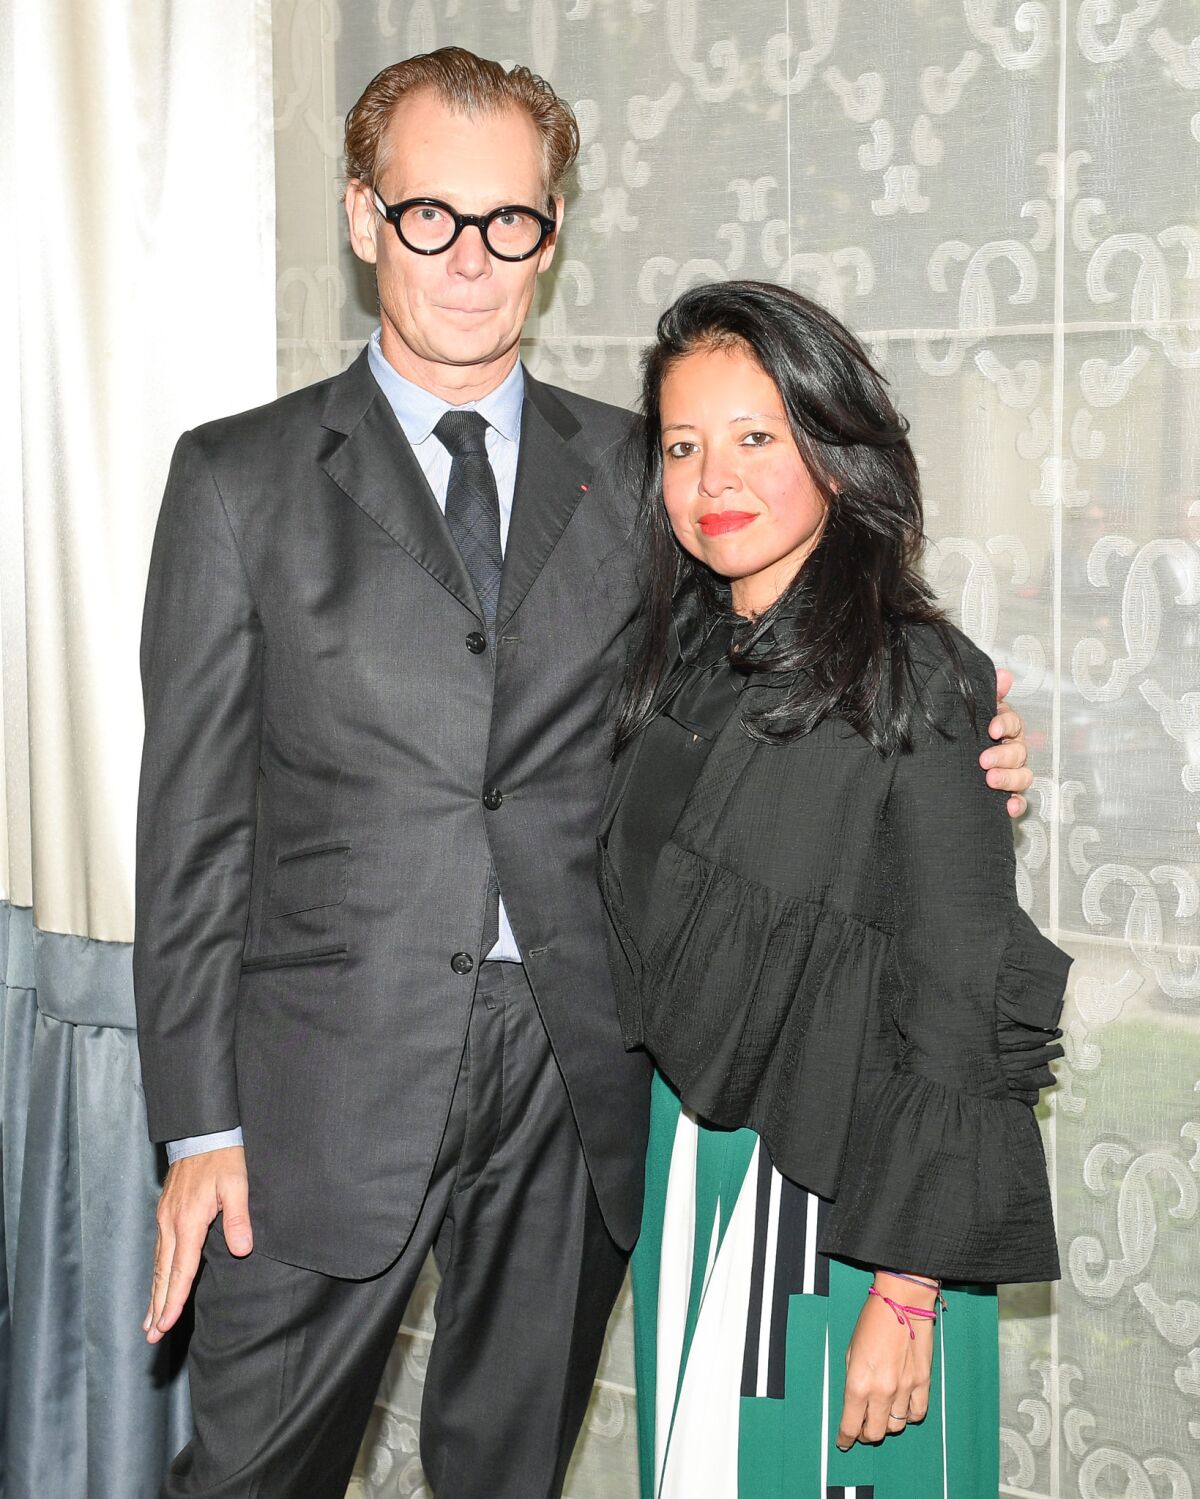 MOCA director Philippe Vergne and his wife, Sylvia Chivaratanond, at the MOCA luncheon on Nov. 1 at the Beverly Wilshire Hotel in Beverly Hills.